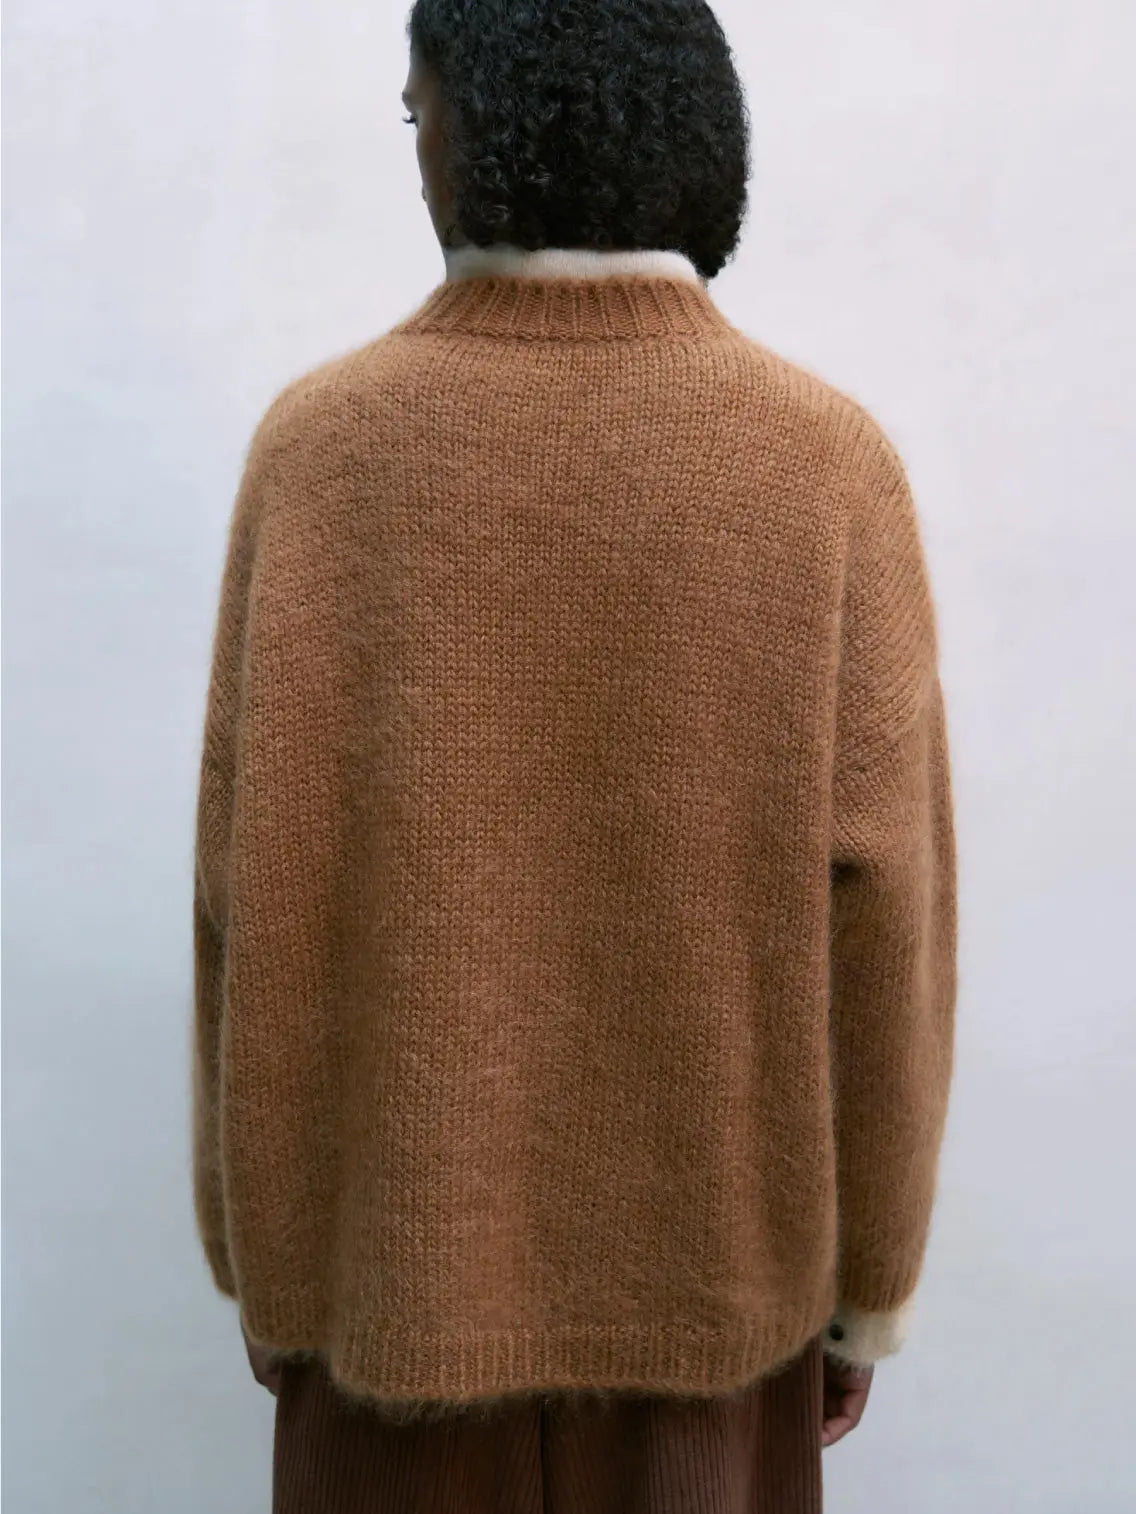 A person with shoulder-length curly hair is wearing a loose-fitting Mohair Sweater Toffee by Cordera over a white collared shirt and brown corduroy pants. They have their hands in their pockets and are standing against a plain light-colored background, looking as if they just stepped out of a stylish boutique in Barcelona.